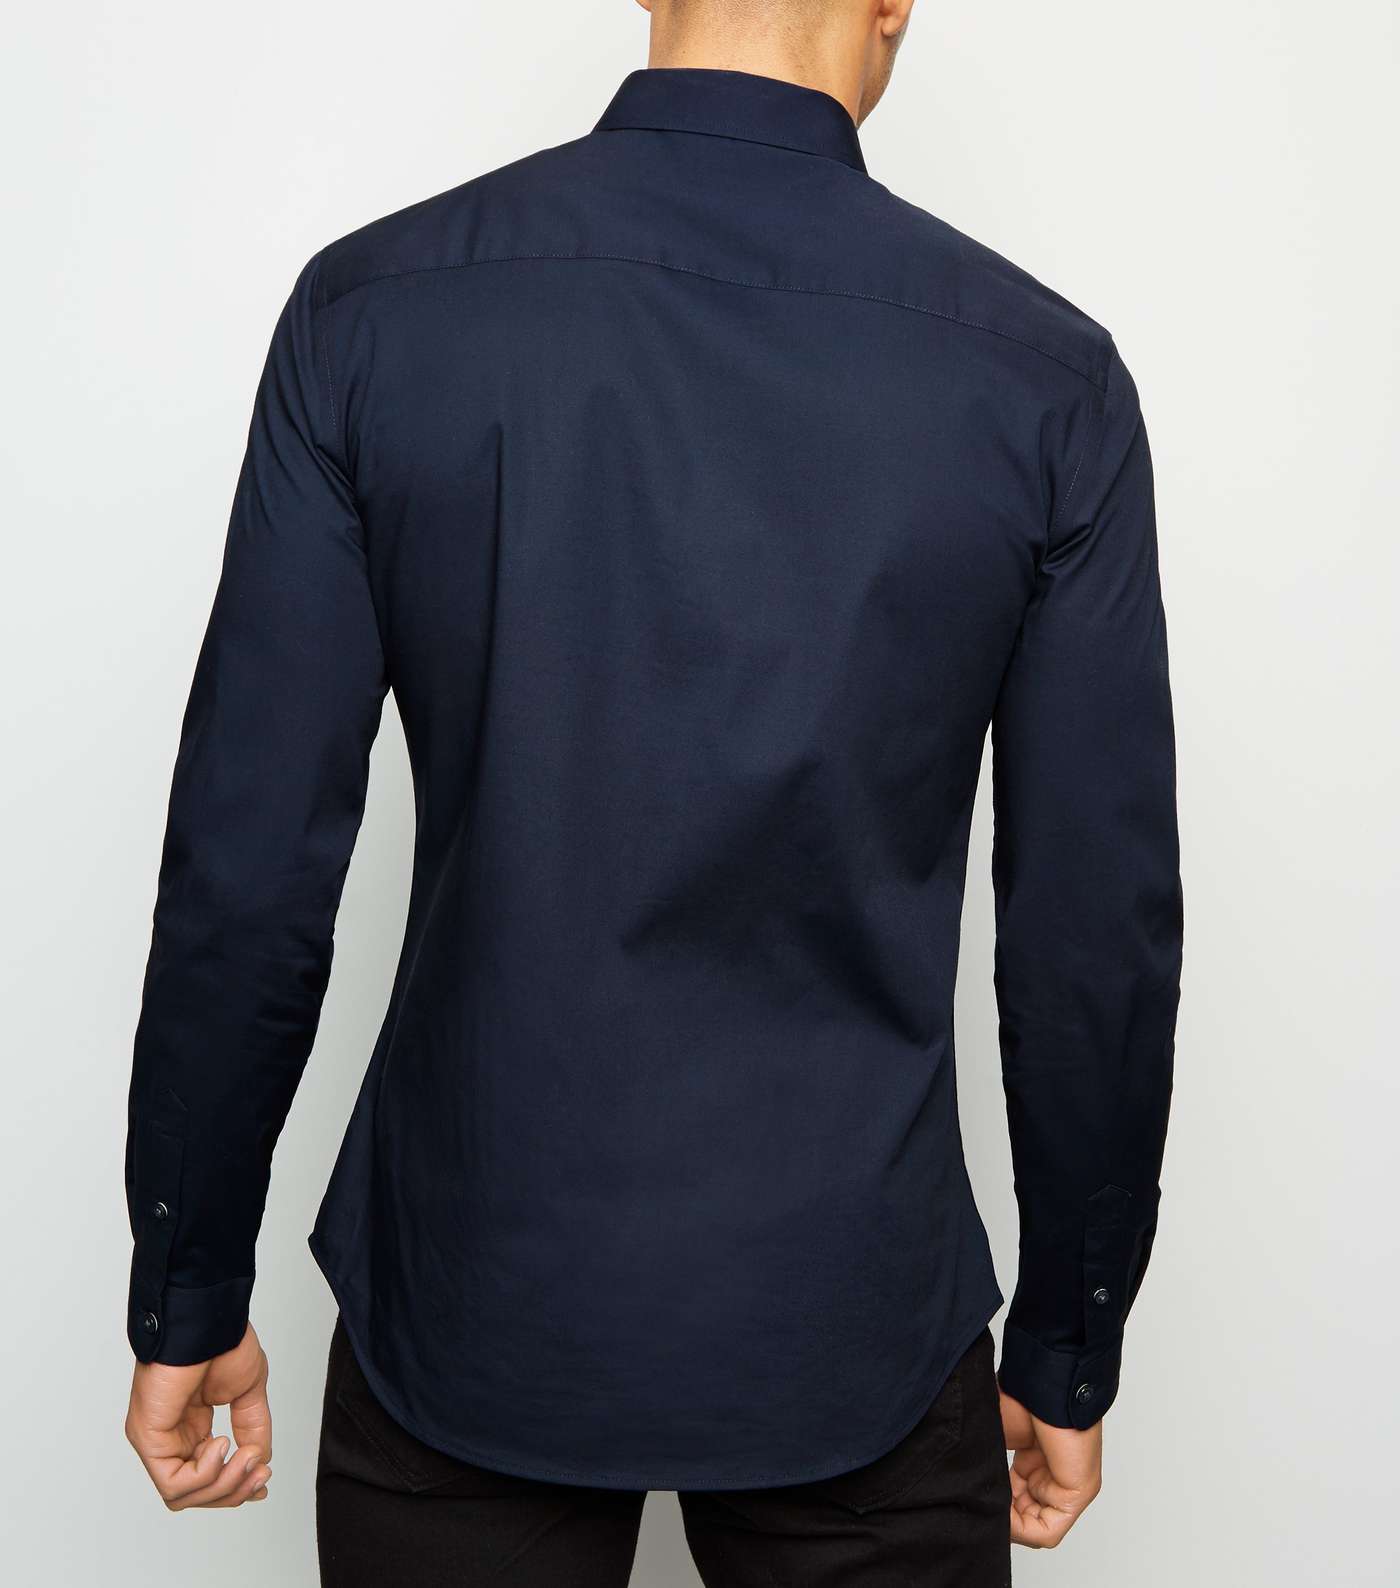 Navy Long Sleeve Muscle Fit Shirt Image 3